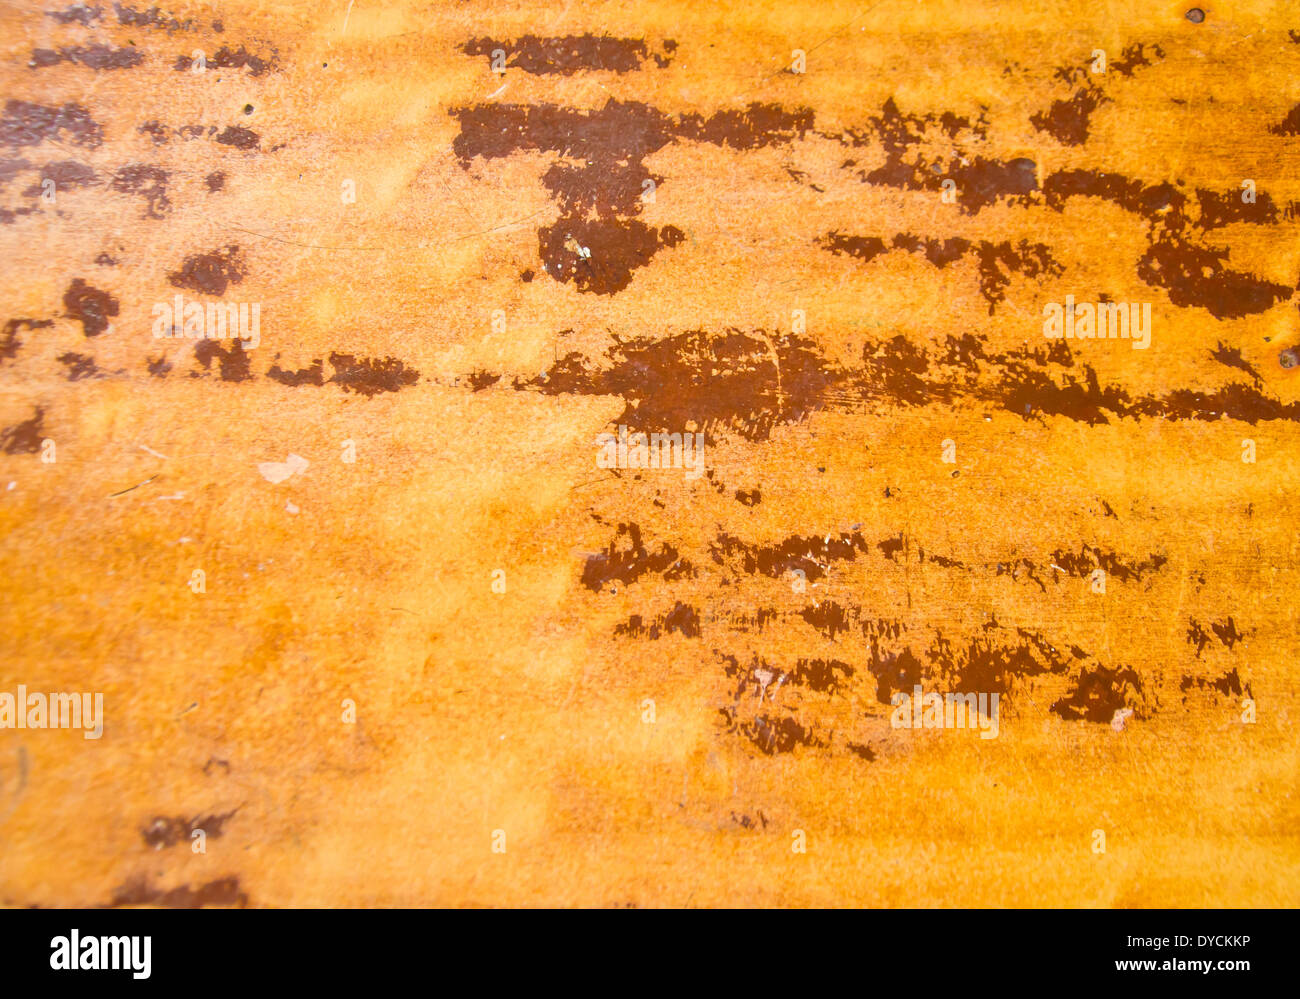 old rusty metal texture background Stock Photo